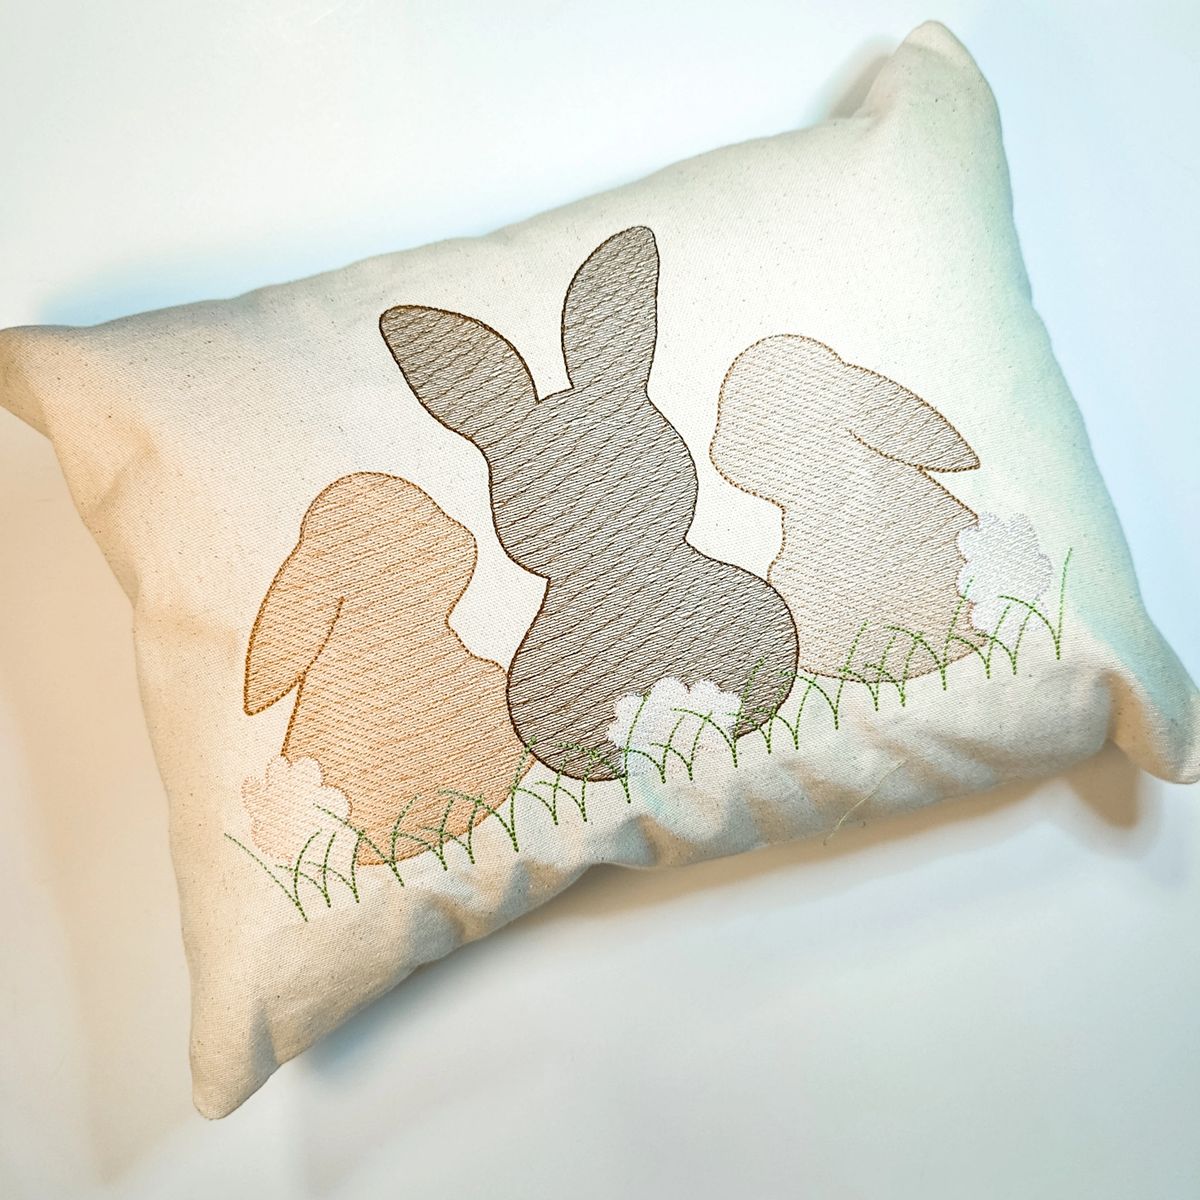 Three bunnies 12 x 16 pillow covers